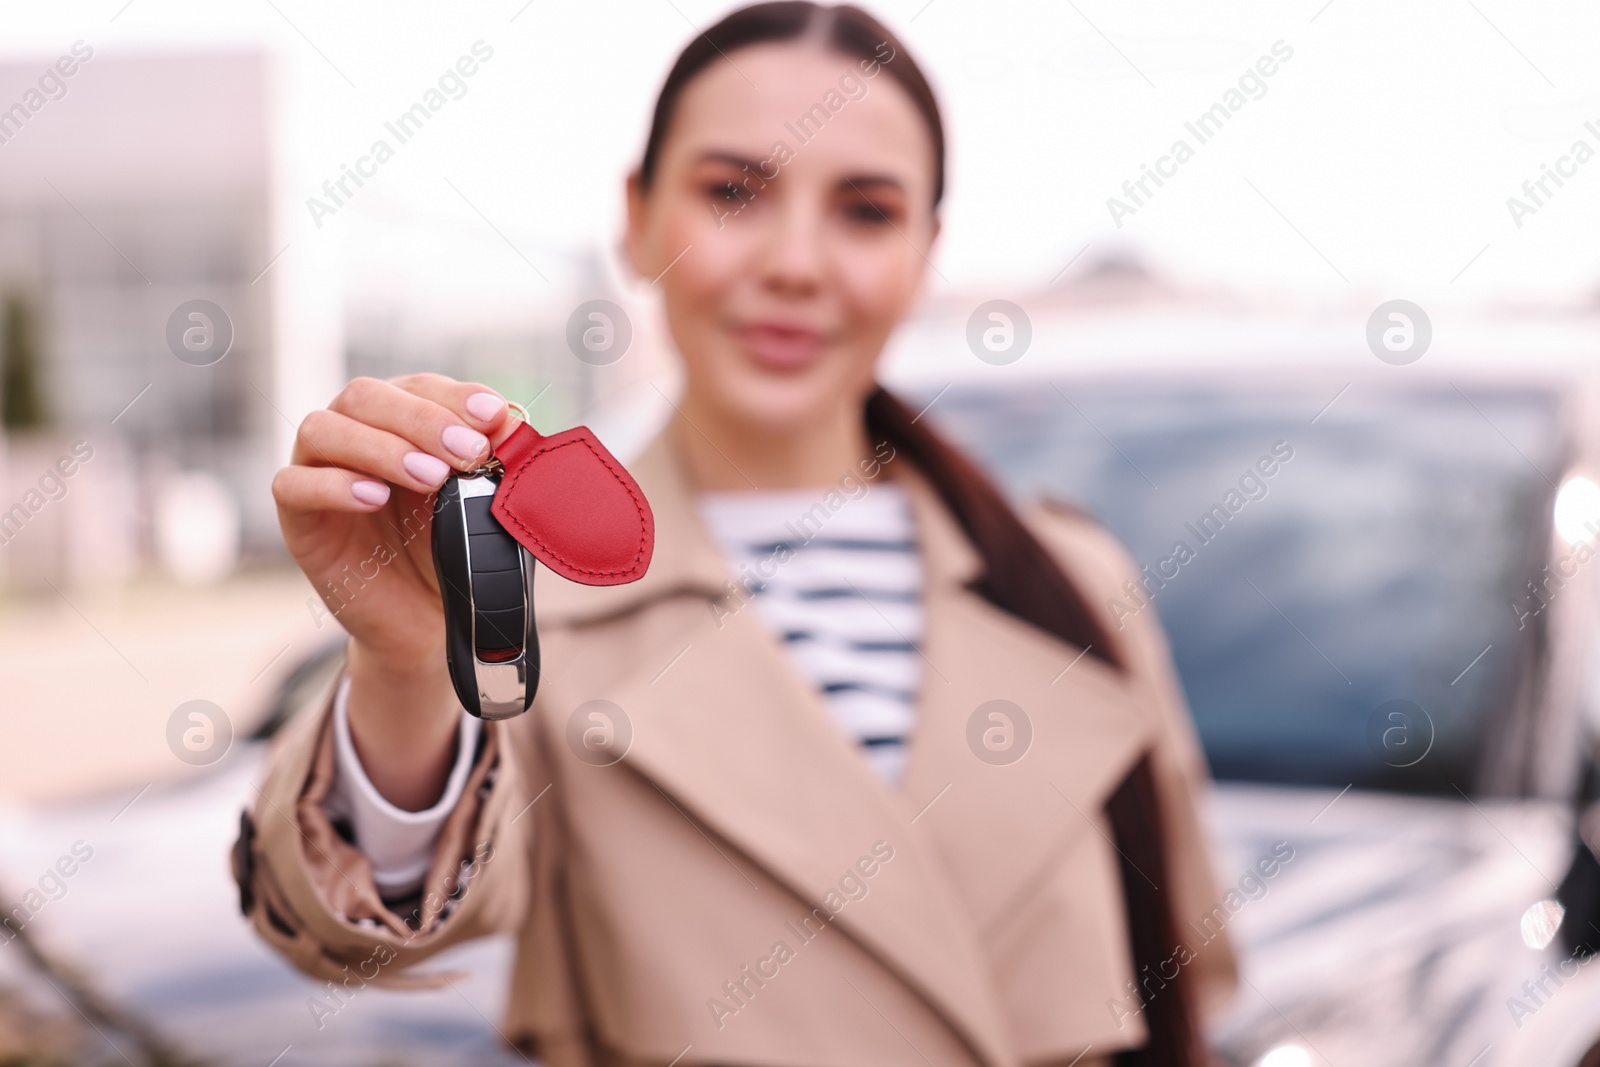 Photo of Woman holding car flip key near her vehicle outdoors, selective focus